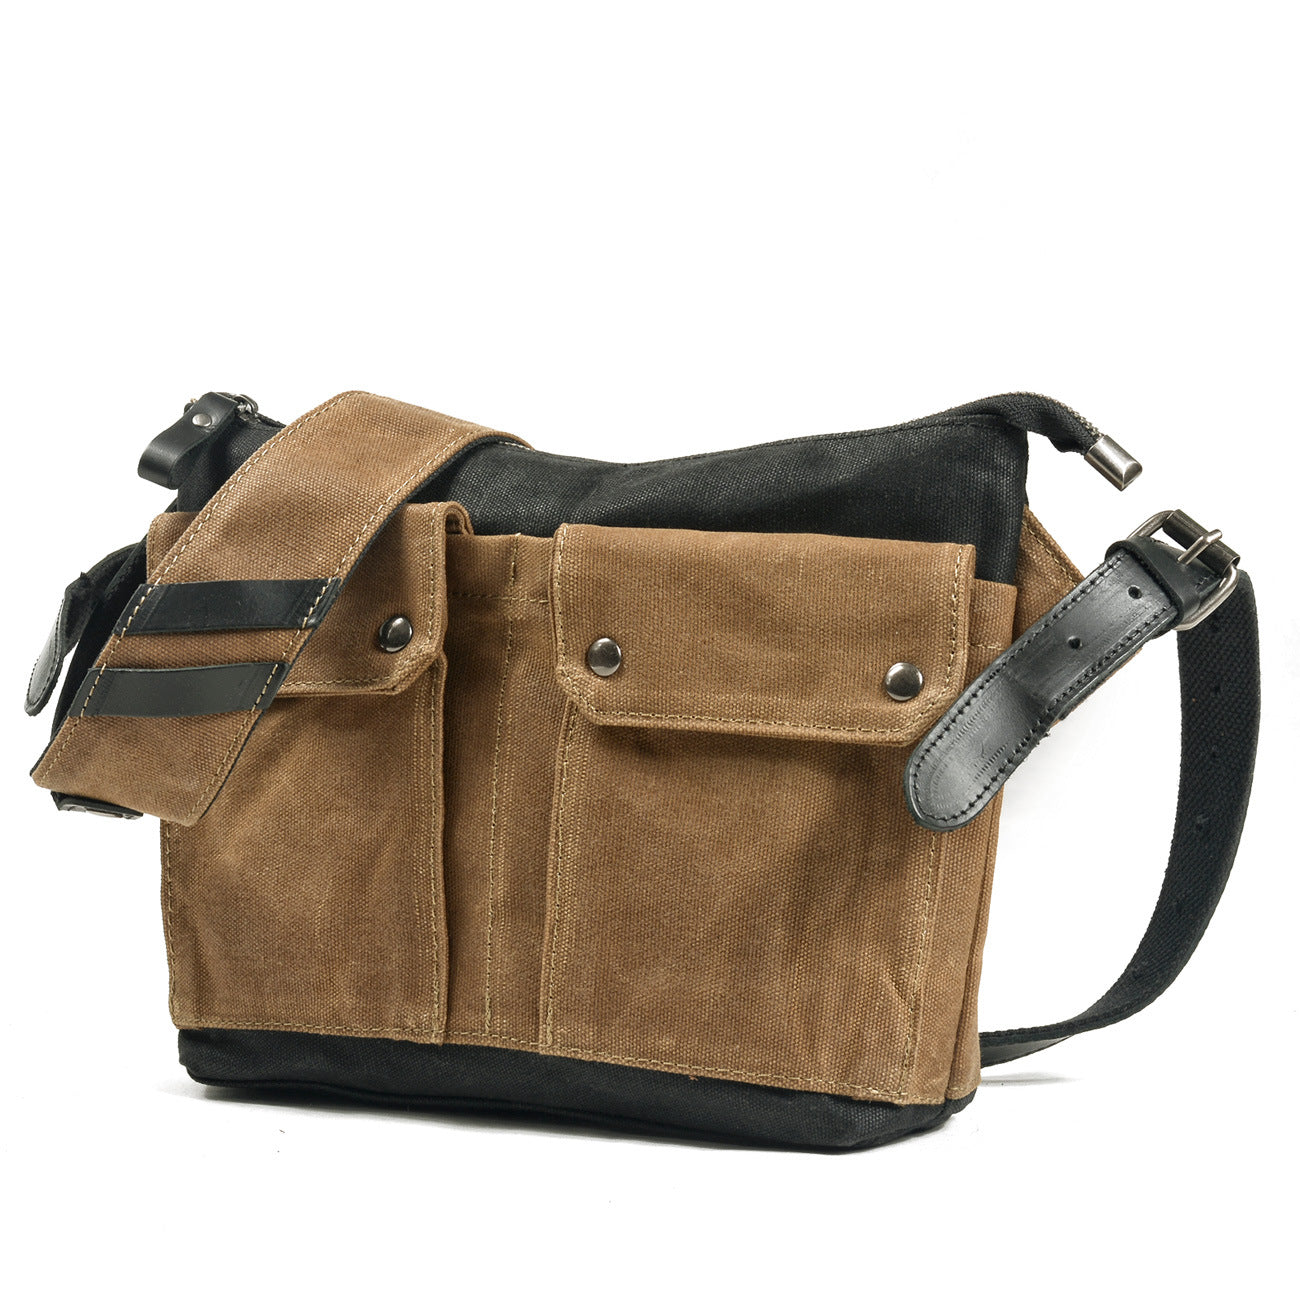 Canvas Shoulder Bags - Stylish and Functional Bags for Everyday